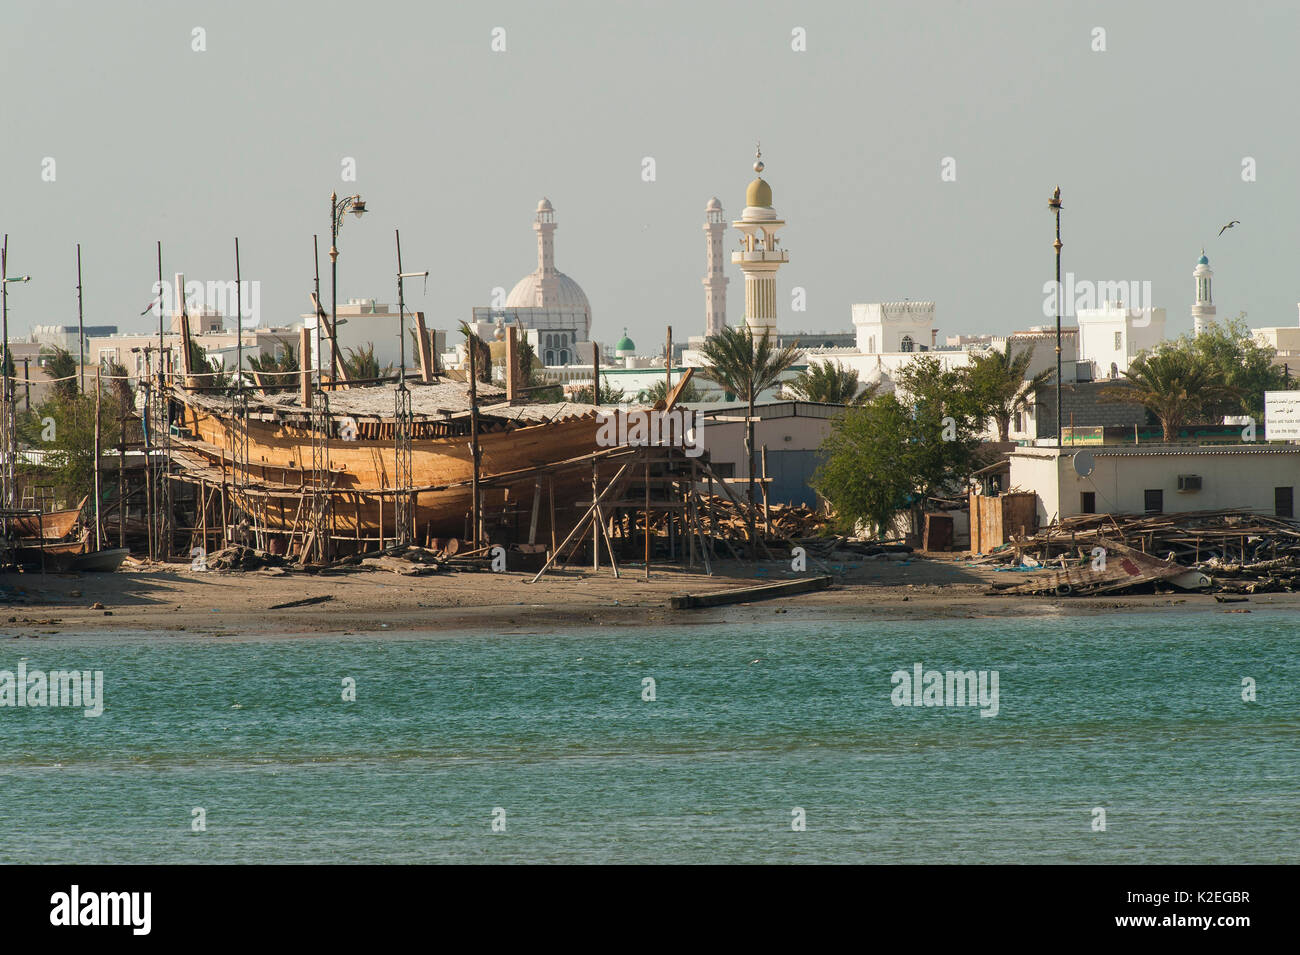 Sur, a city at the coast of Oman, with mosques and a traditional dock for the construction of wooden boats, Sultanate of Oman, February. Stock Photo